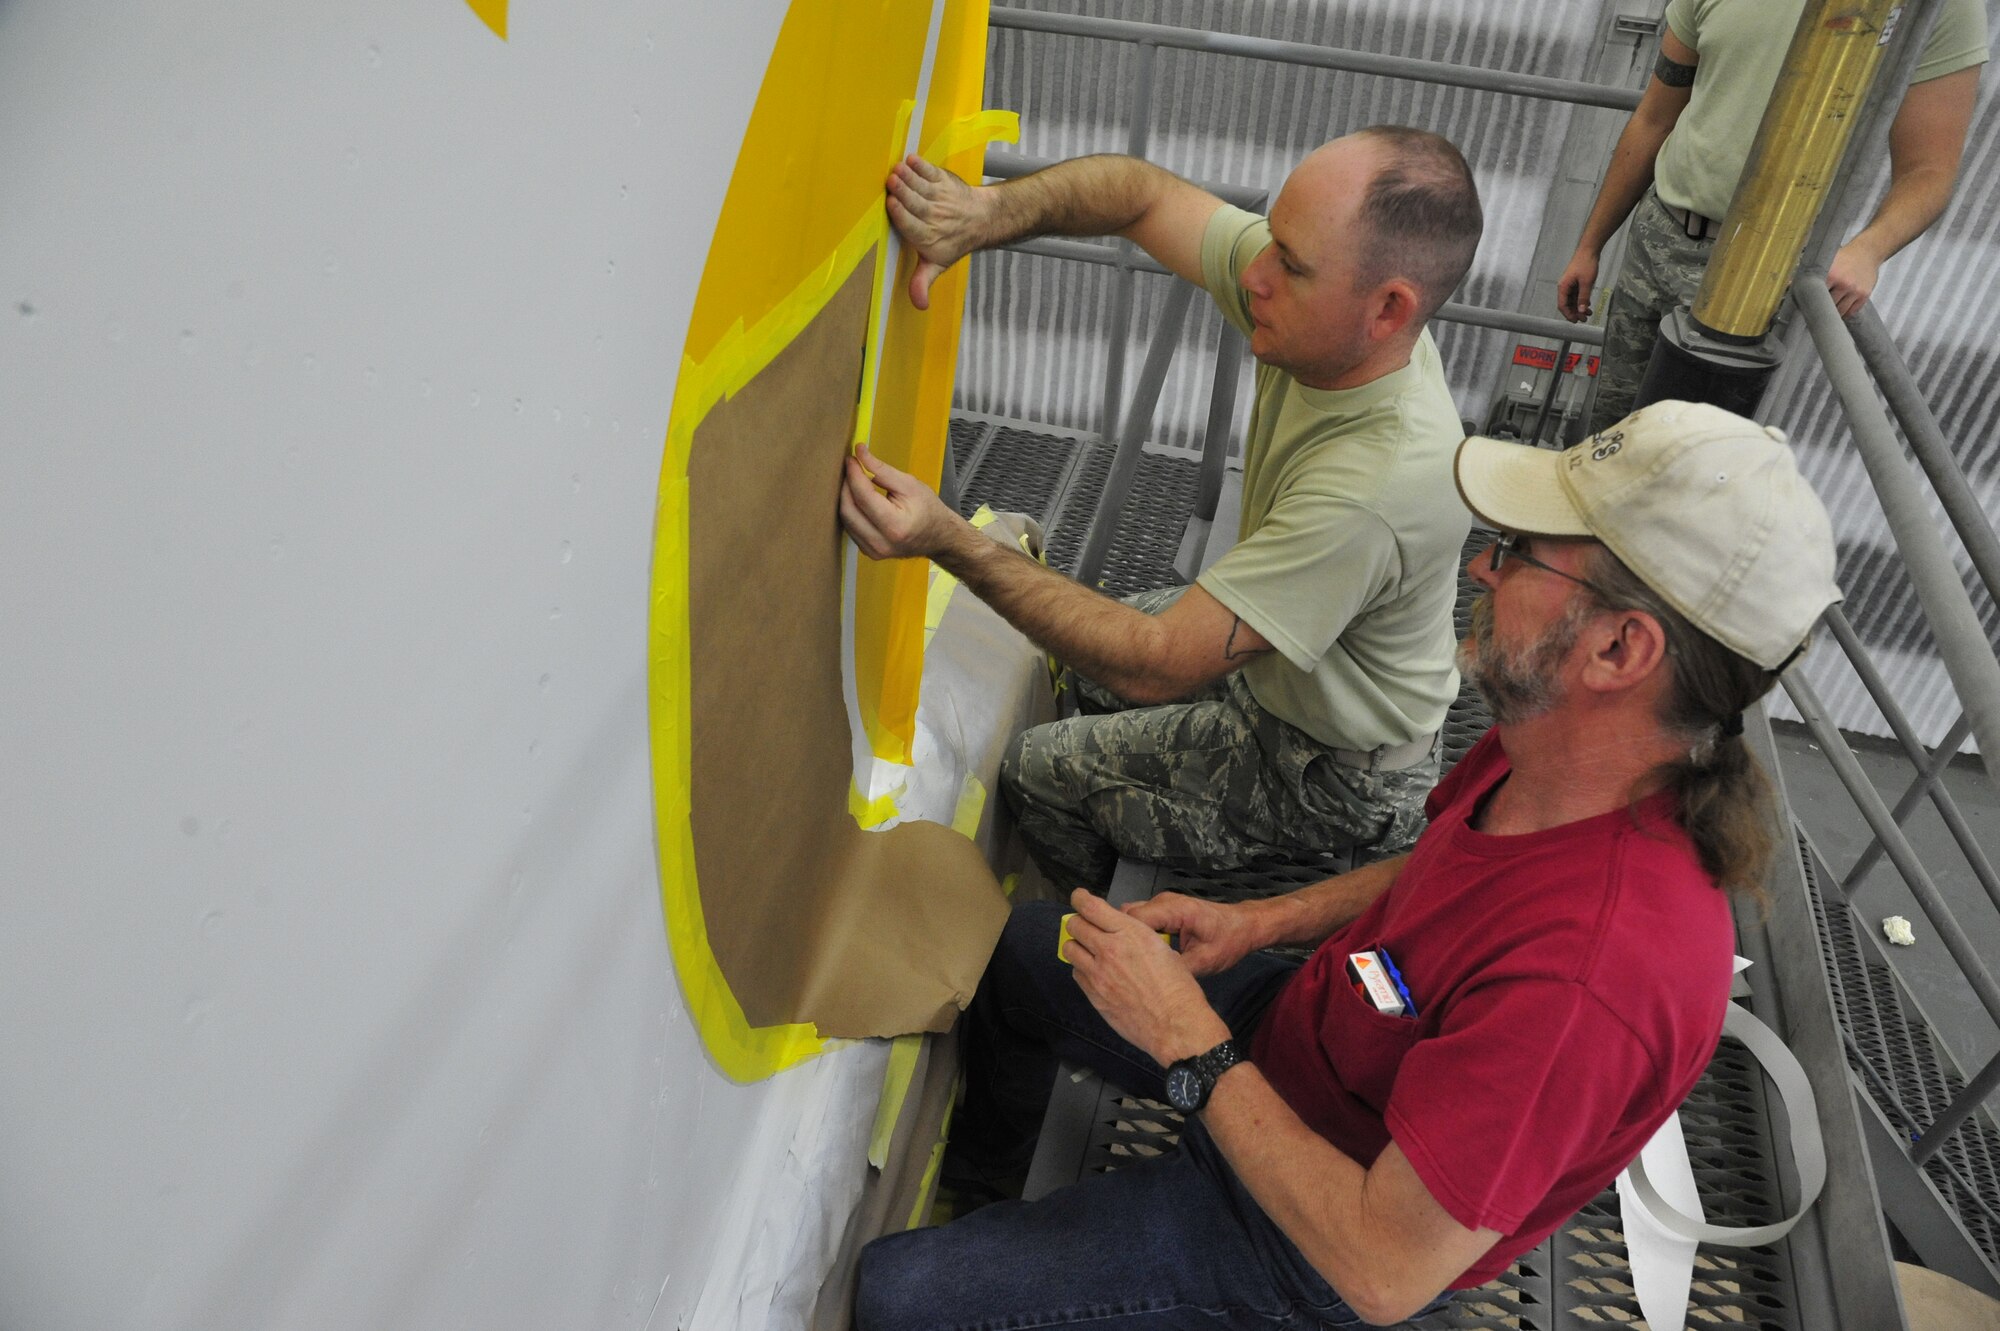 FROM LEFT: Staff Sgt. Justin Spurlock, 56th Equipment Maintenance Squadron aircraft structural maintenance craftsman, and Michael Rairden, 56th EMS aircraft painter, tape down a stencil of the Merlion design Oct. 17 in the corrosion building paint booth. The Merlion, which has a head of a lion and body of a fish, is an important symbol to Singapore. (U.S. Air Force photo/Senior Airman Grace Lee)